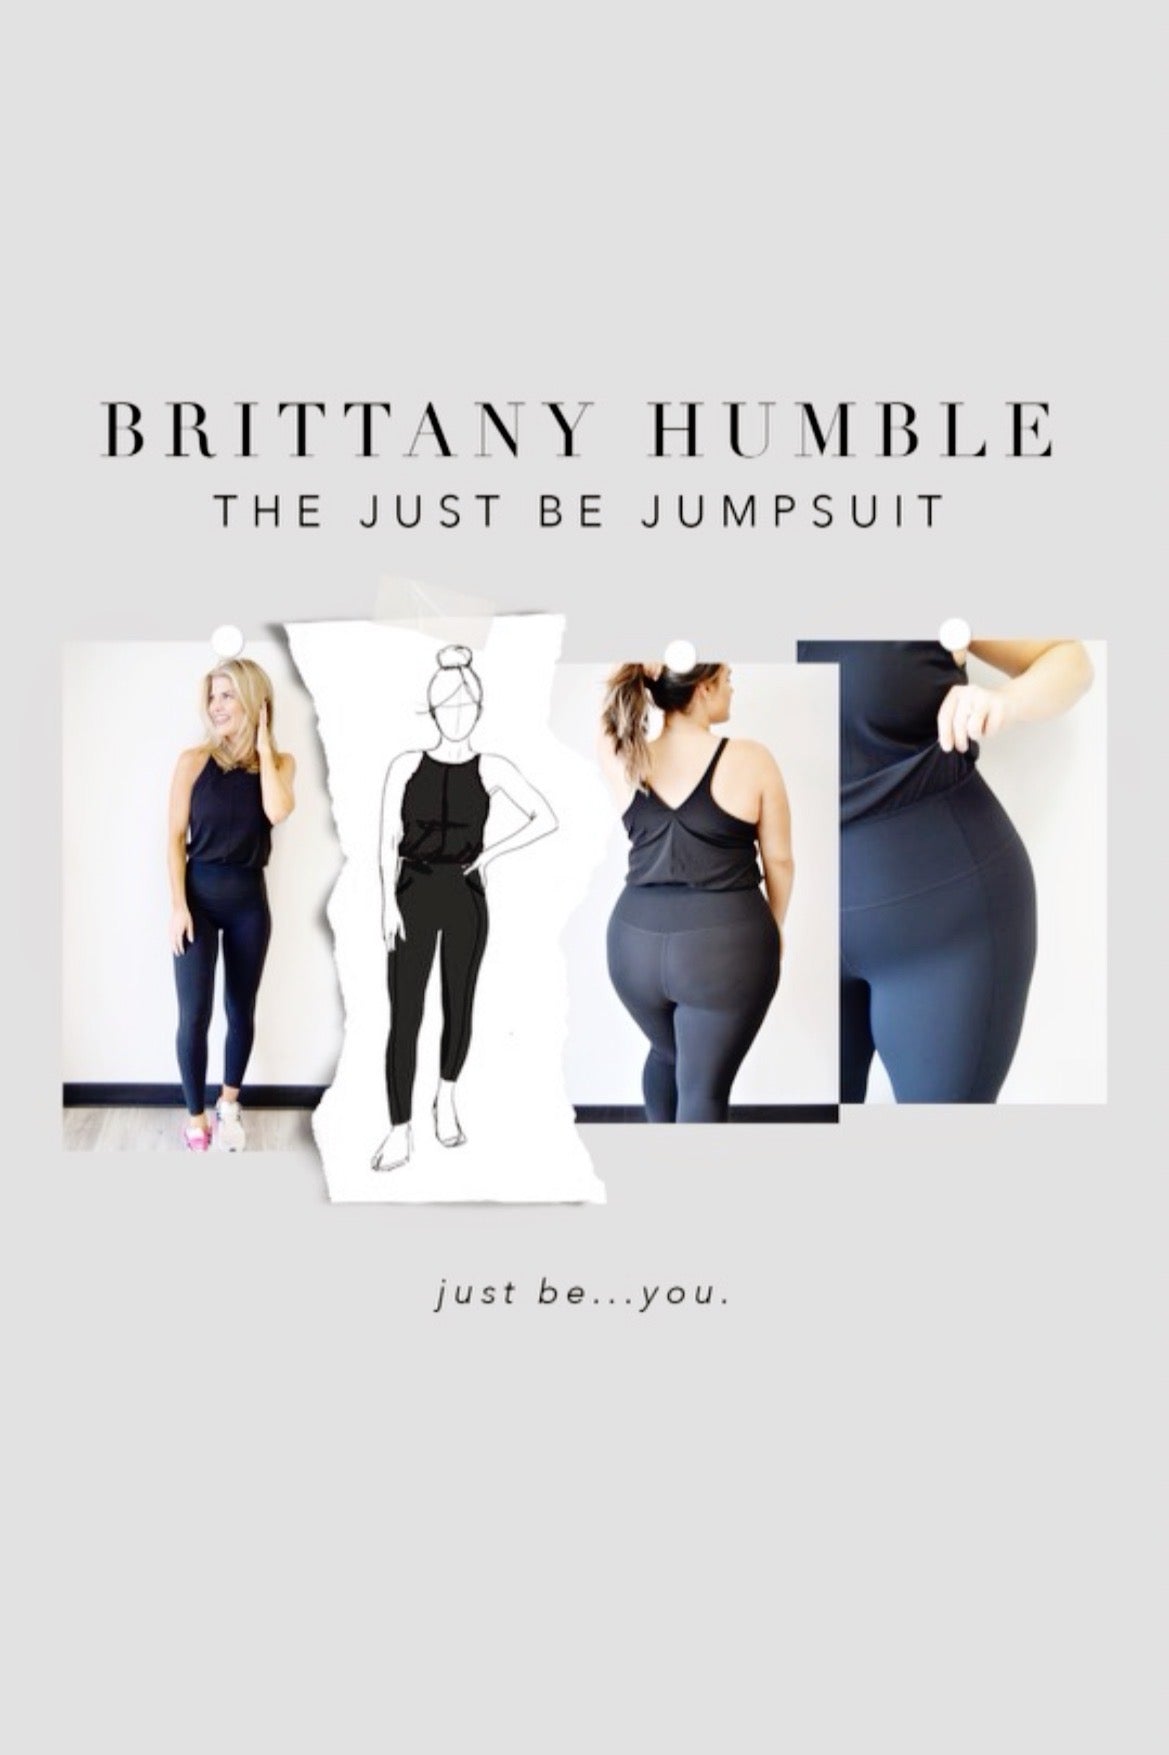 The Brittany Humble Just Be Jumpsuit